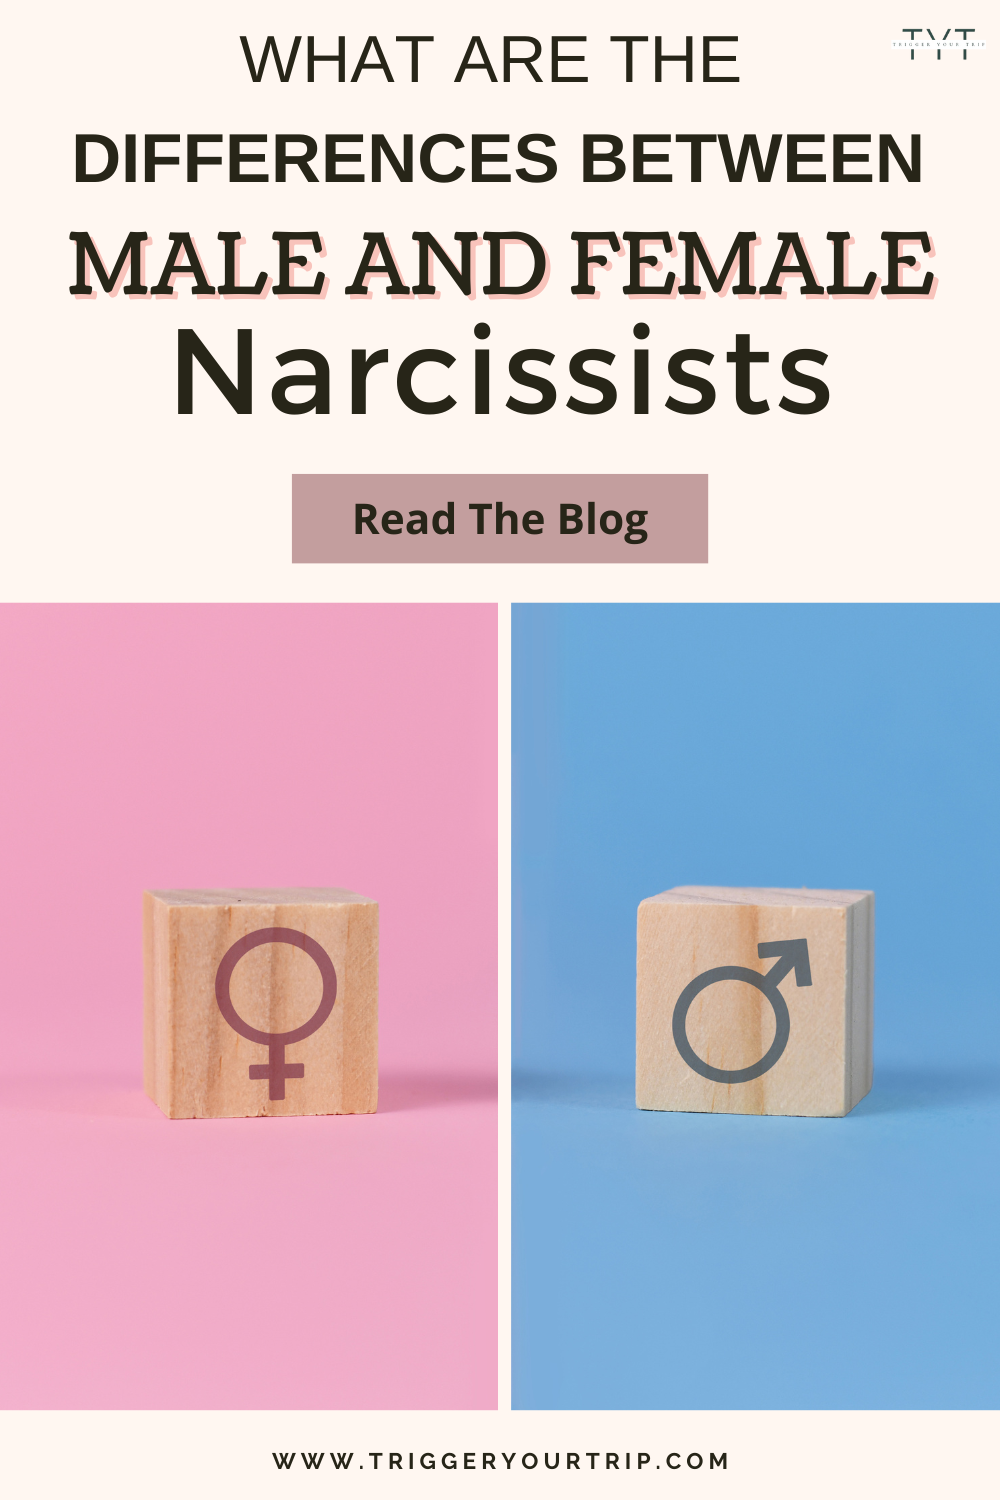 male narcissist and narcissist women differences